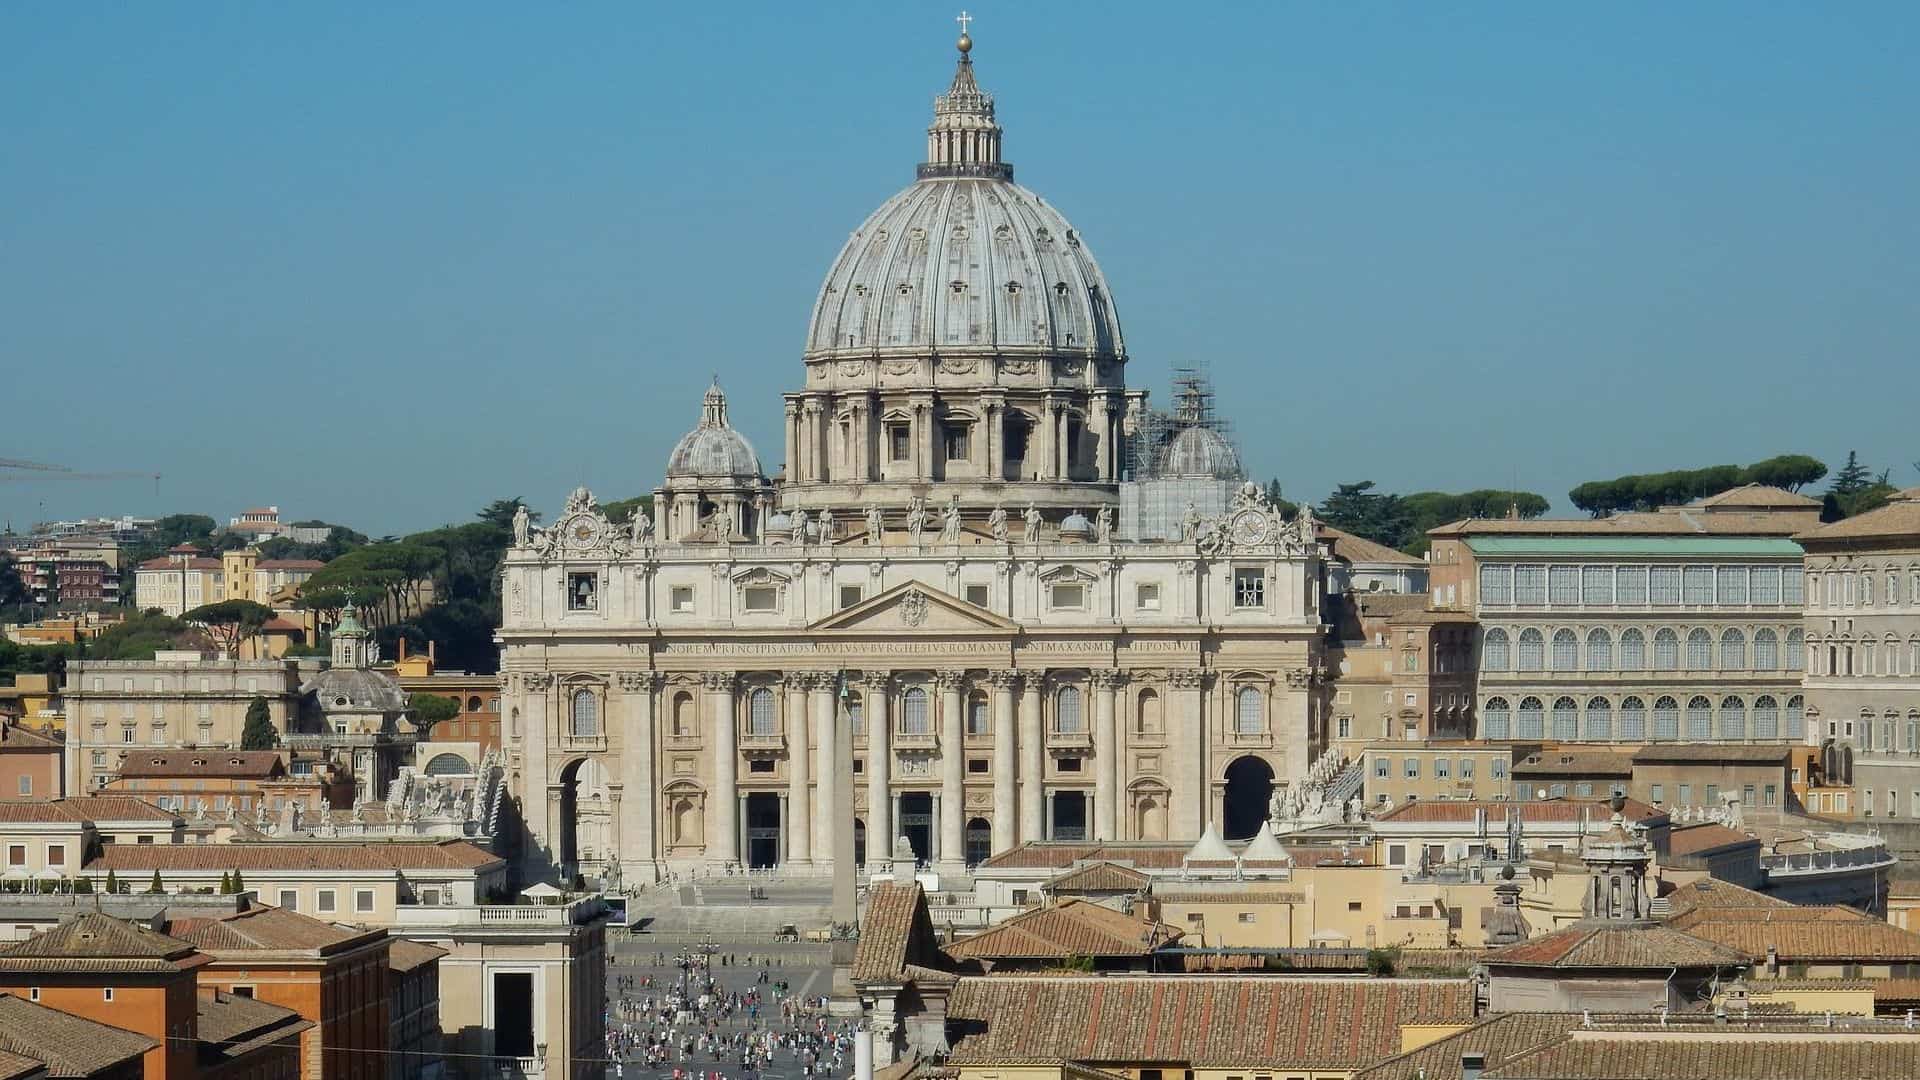 Shot of St Peters Basilica from distance